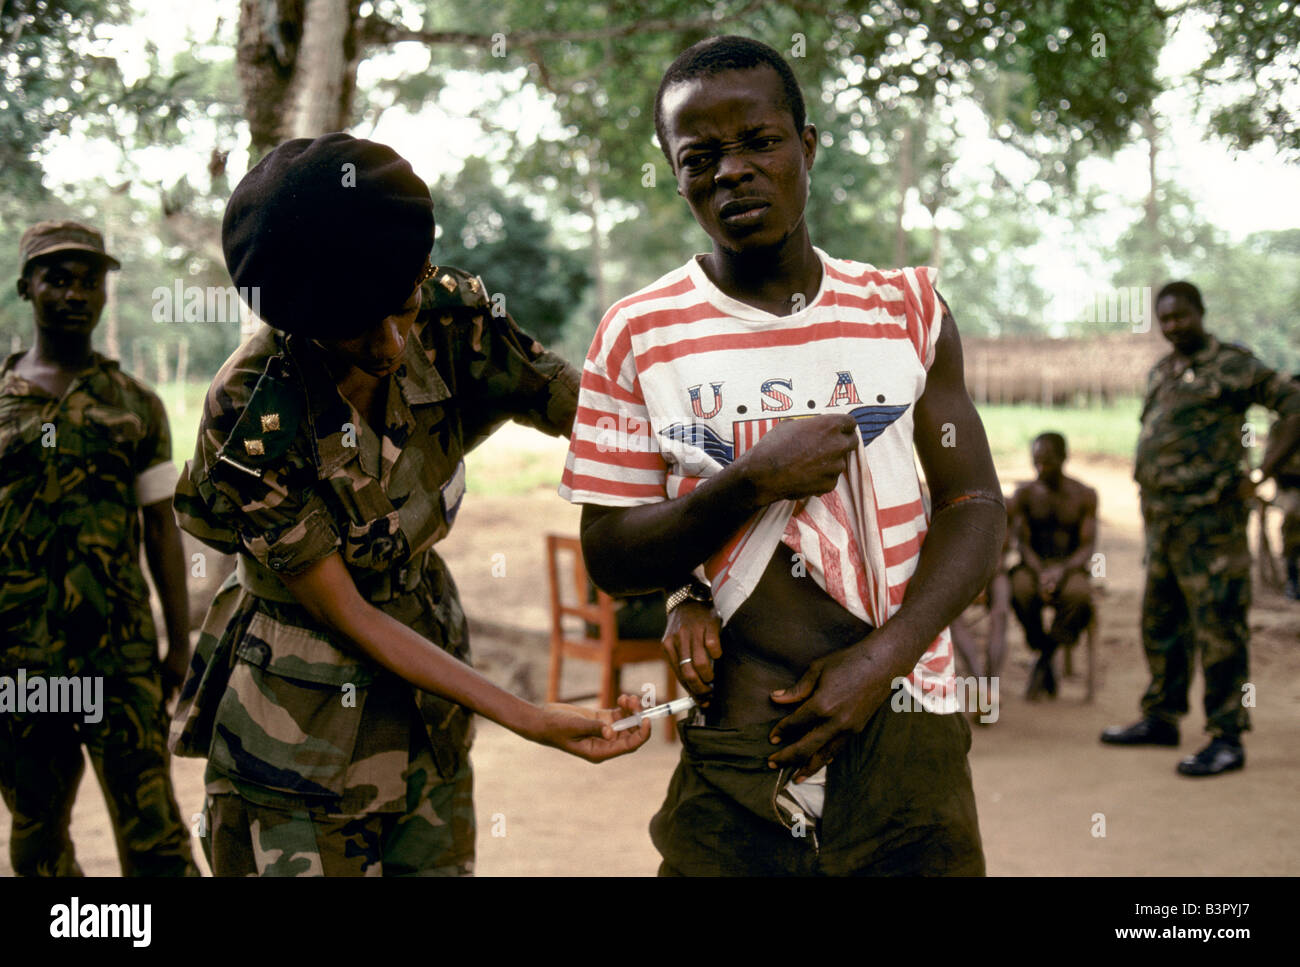 JULY 1992: A REBEL SOLDIER IS GIVEN AN INNOCULATION FOR WOUND BY GOVERNMENT SOLDIERS WHO RECENTLY CAPTURED HIS GROUP OF REBELS. Stock Photo